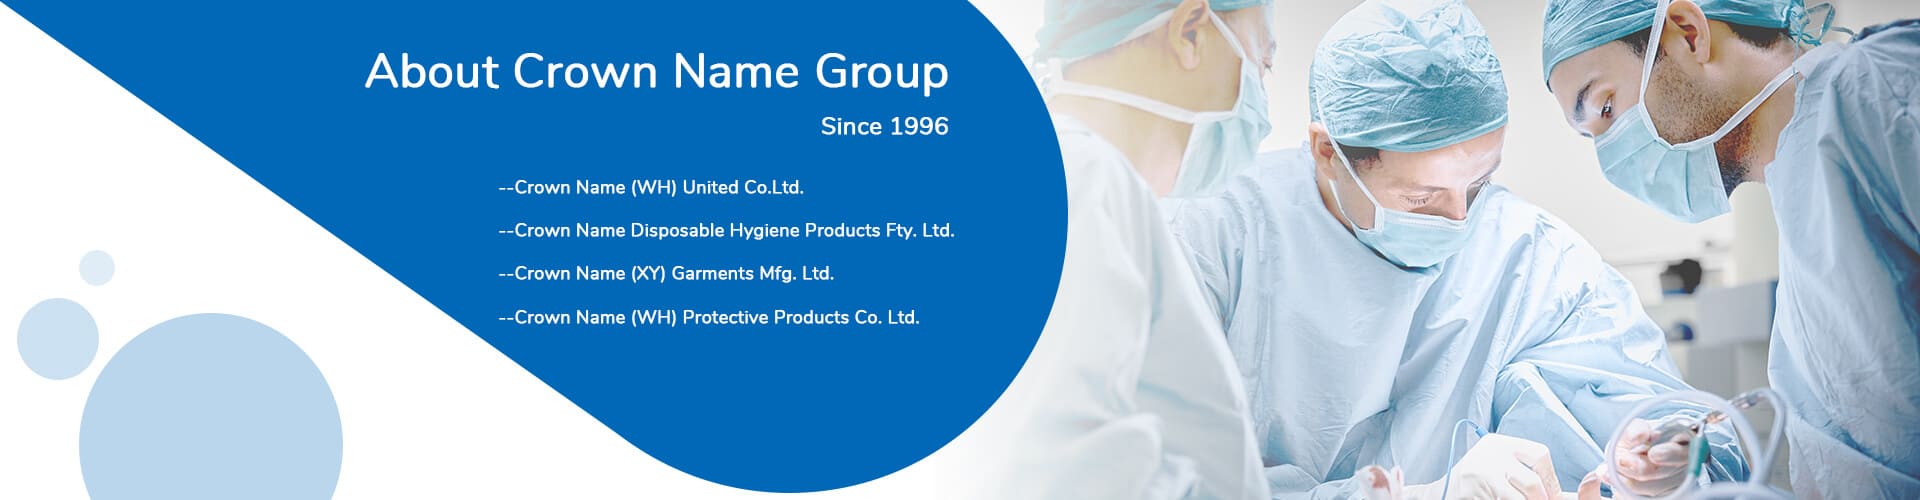 About Crown Name Group